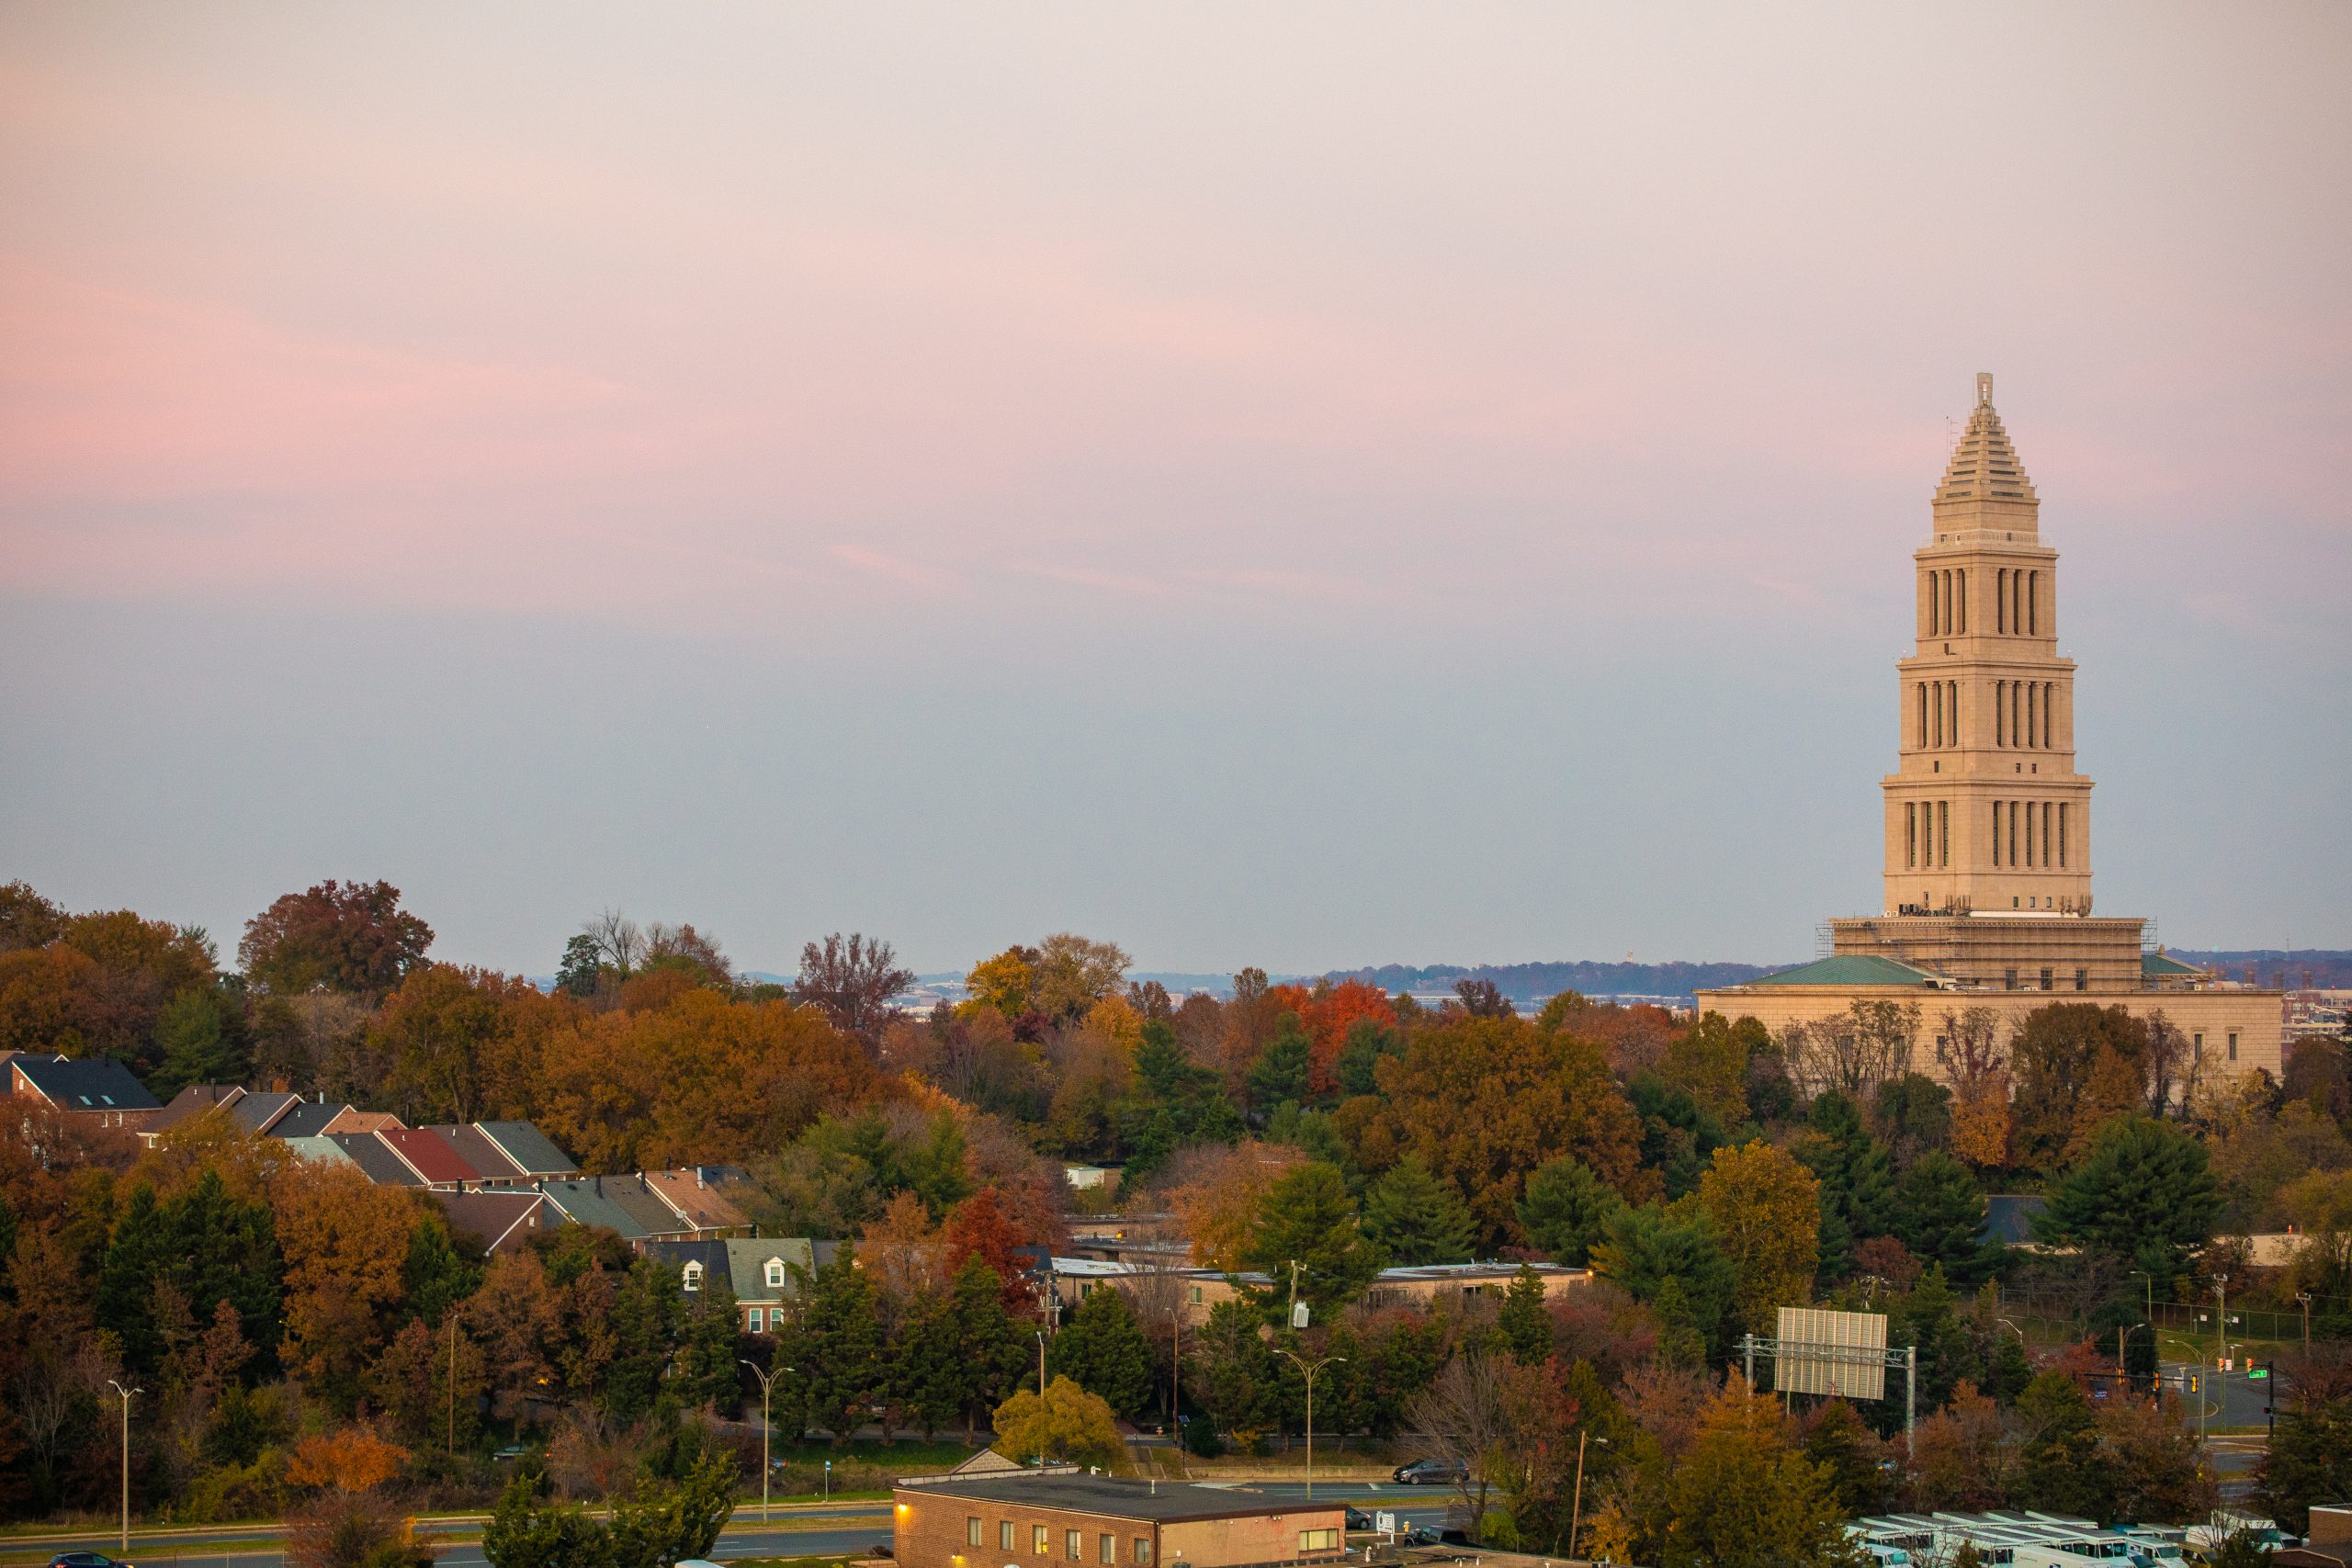 Sweeping views of the The George Washington Masonic National Memorial and beyond